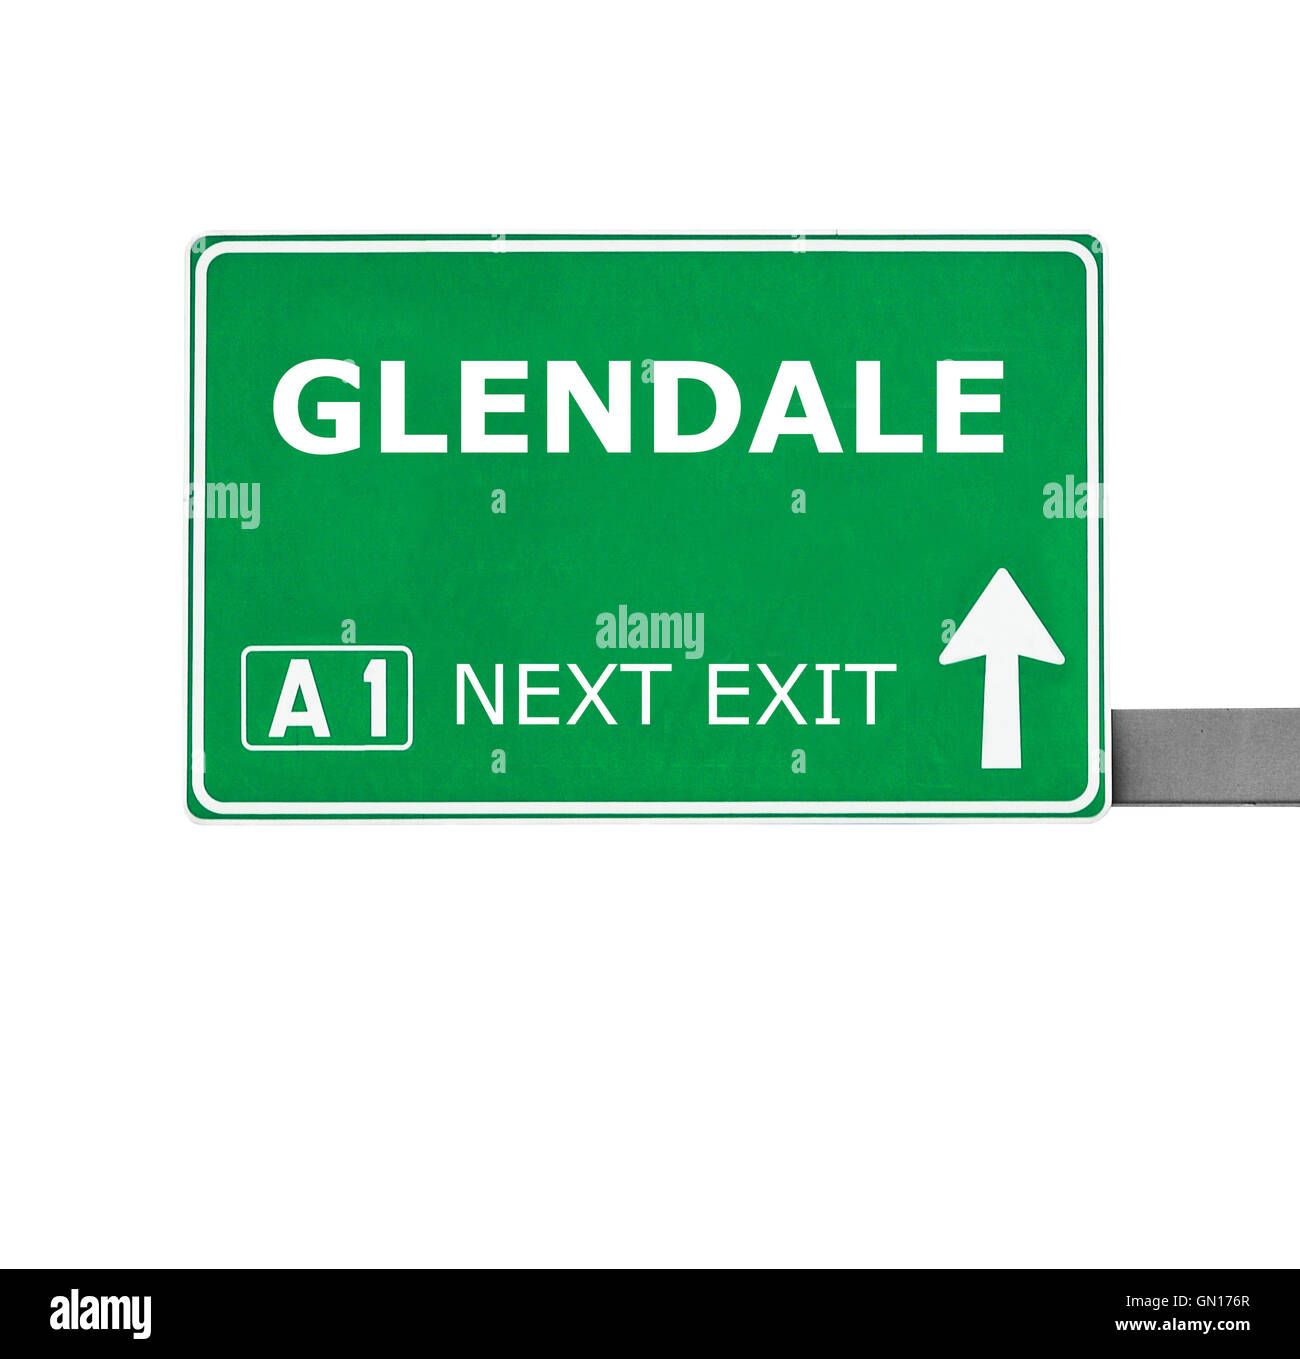 GLENDALE road sign isolated on white Stock Photo